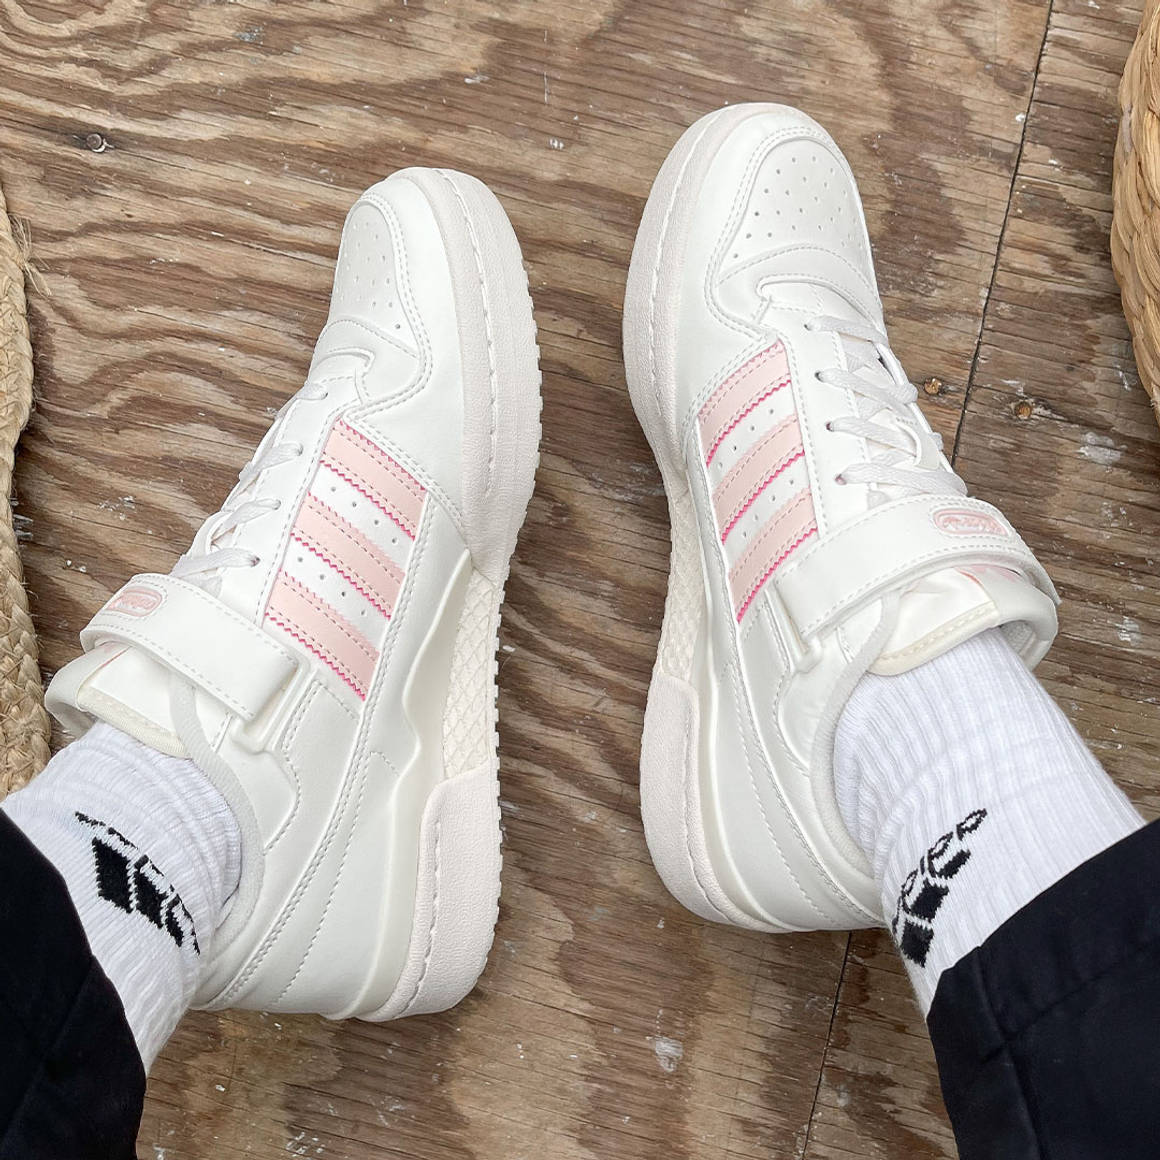 Colaborar con Paleto ellos 3 Reasons Why You Need to Cop the adidas Forum Low | The Sole Supplier